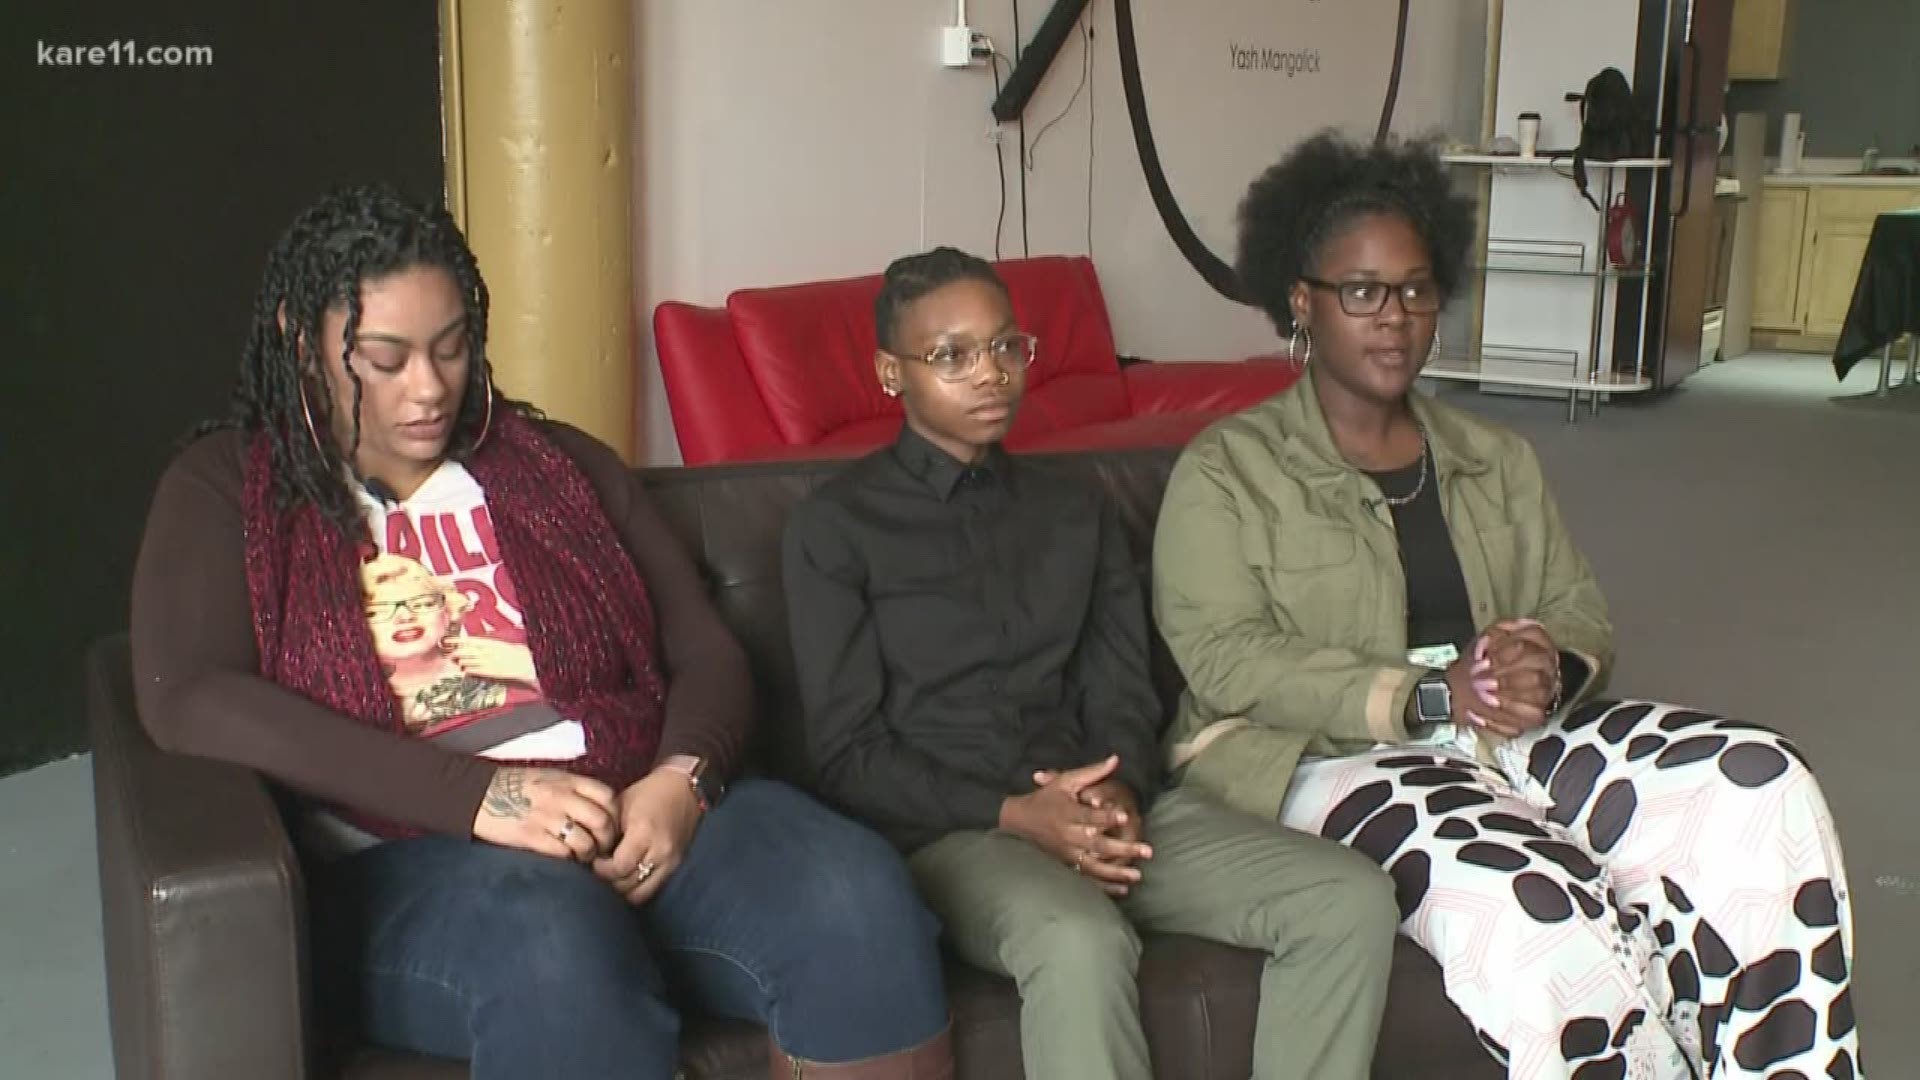 Trauma. It often shows up in our lives unexpected. Teens and children need resources and people to talk to about the pain they've experienced. A group of women from North Minneapolis are advocating for them. They call themselves Trauma Troopers. https://k